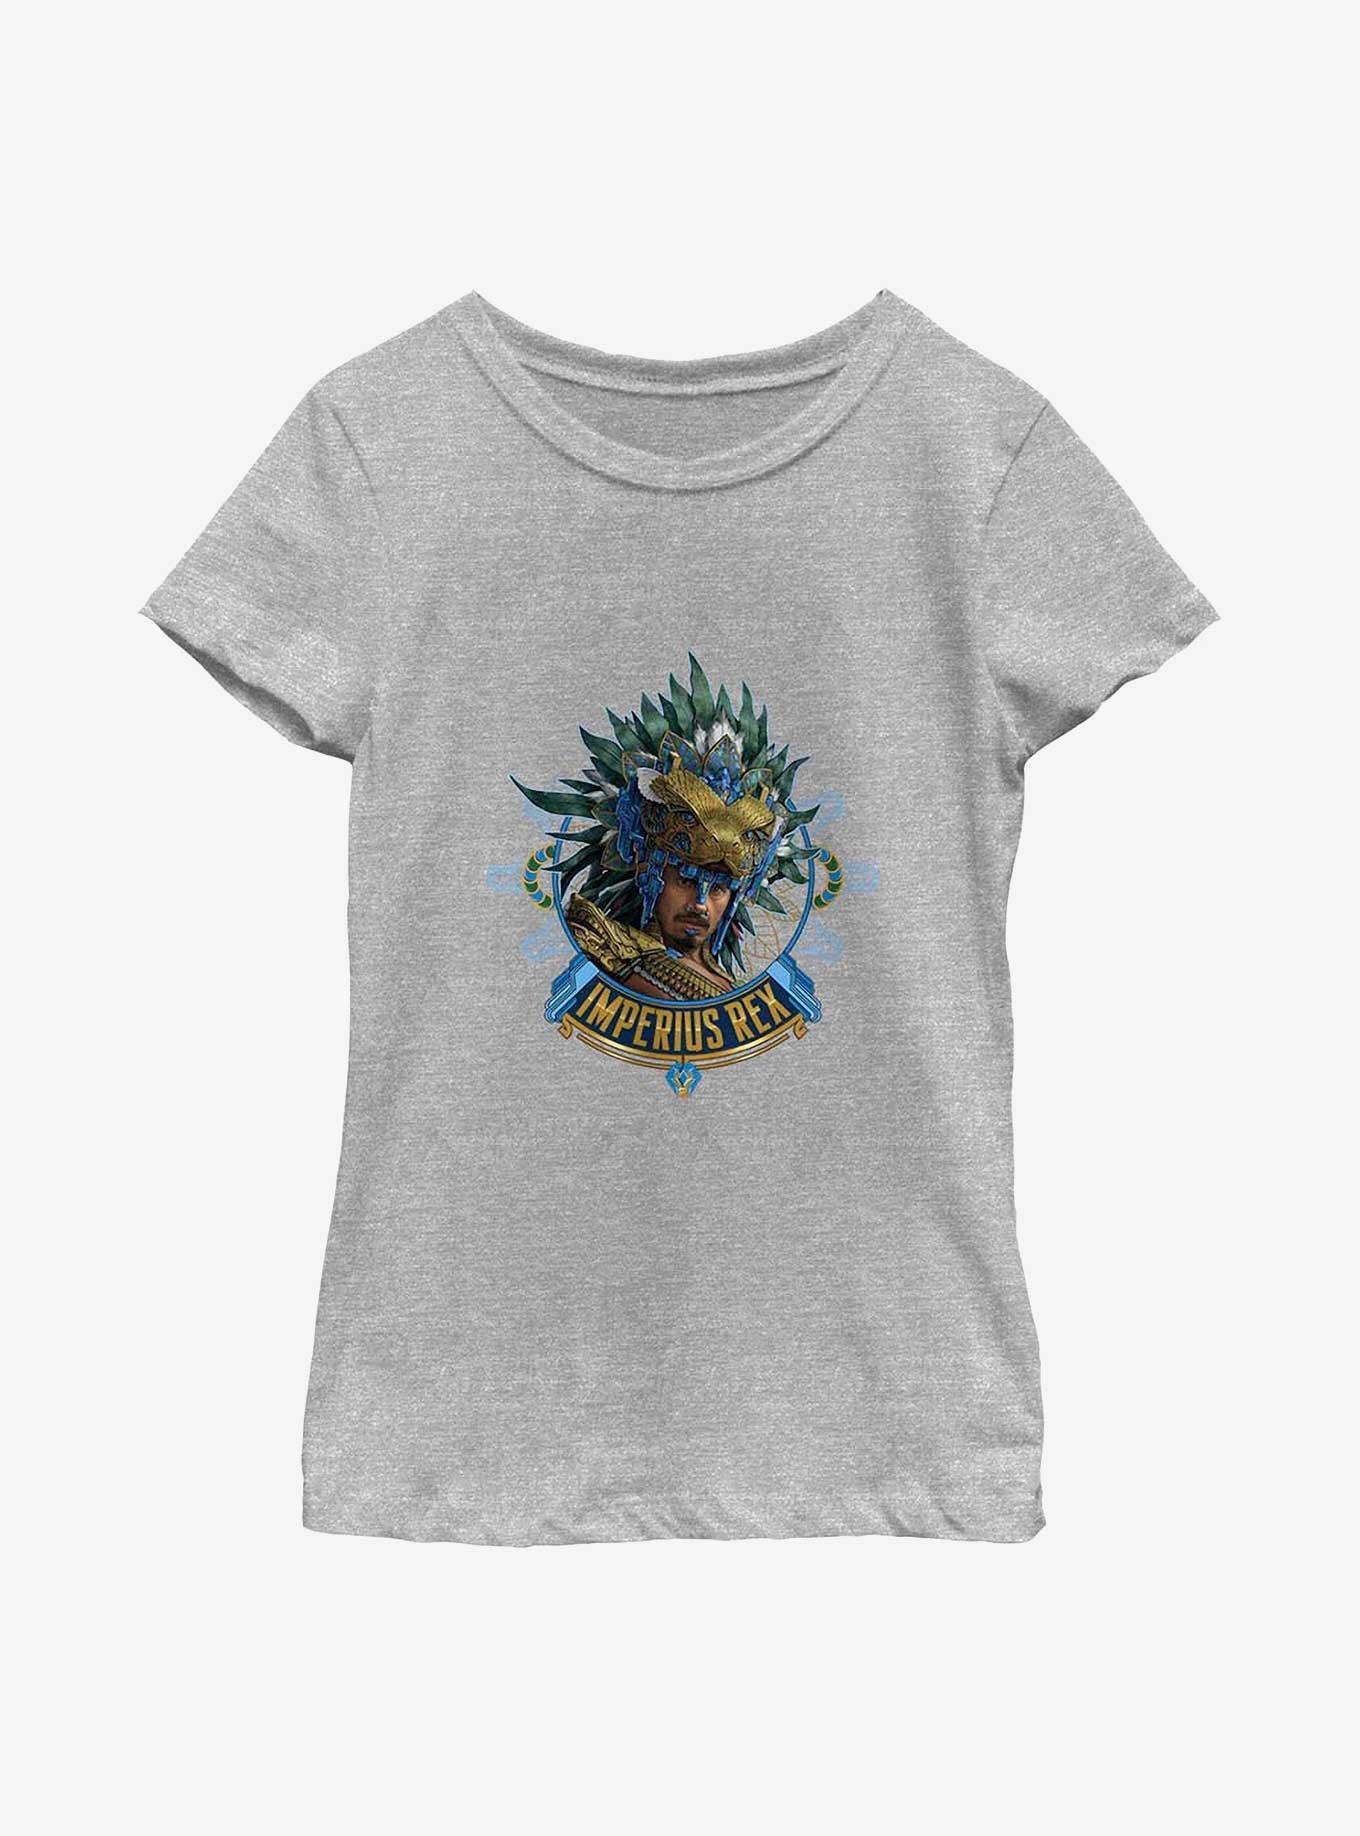 Marvel Black Panther: Wakanda Forever Imperius Rex Helmet Youth Girls T-Shirt, ATH HTR, hi-res